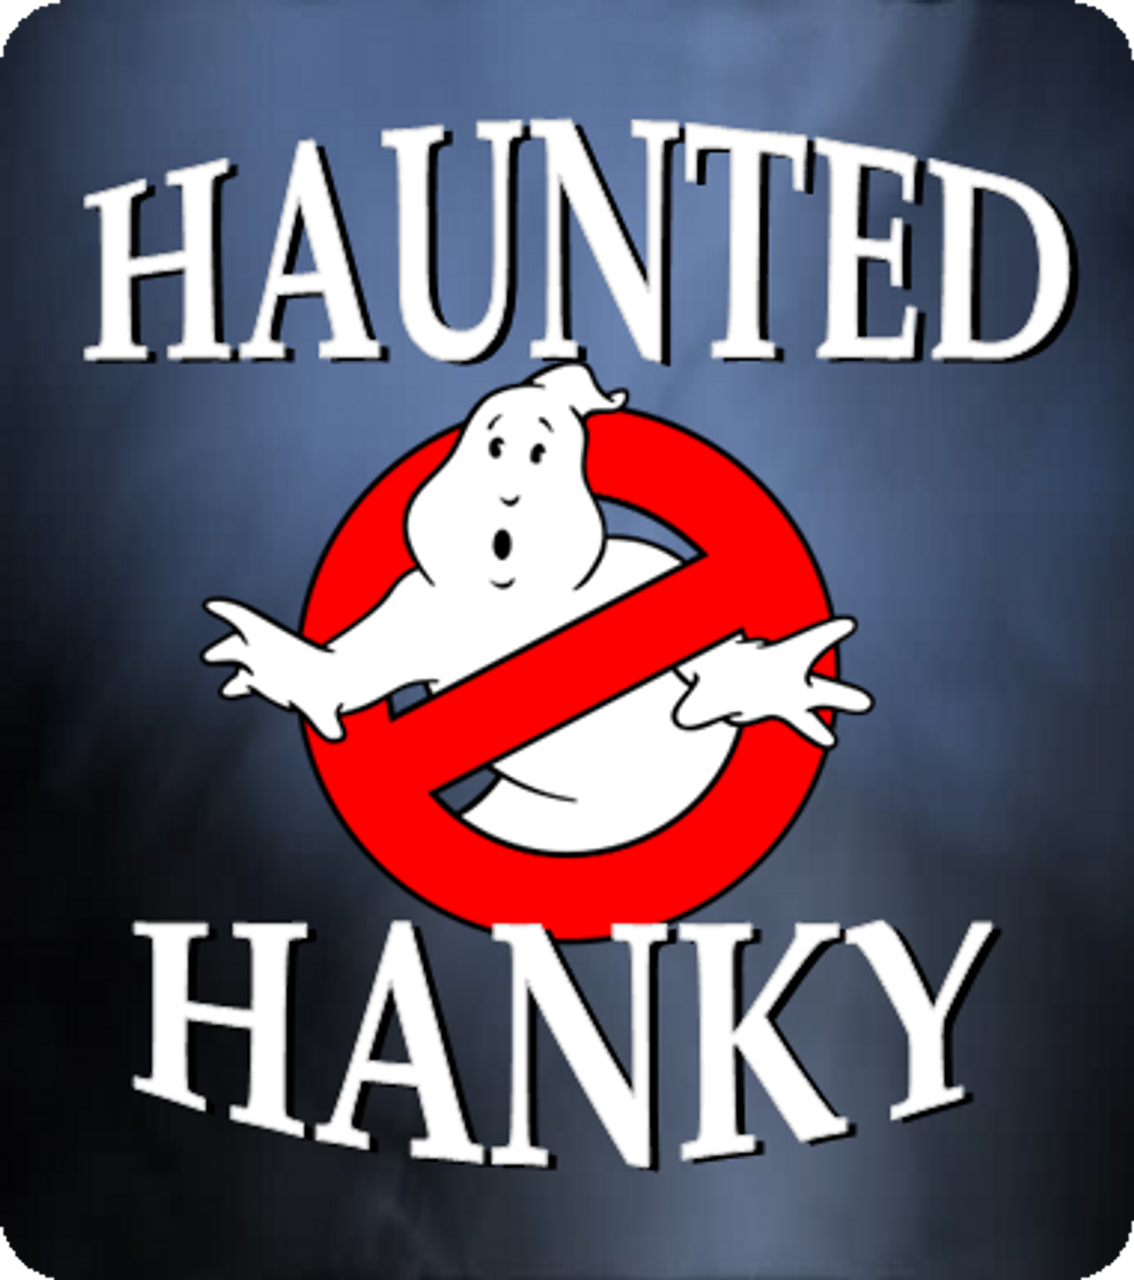 Glorpy the Haunted Hanky - by Royal Magic - Catch a Ghost! - Be Filled ...